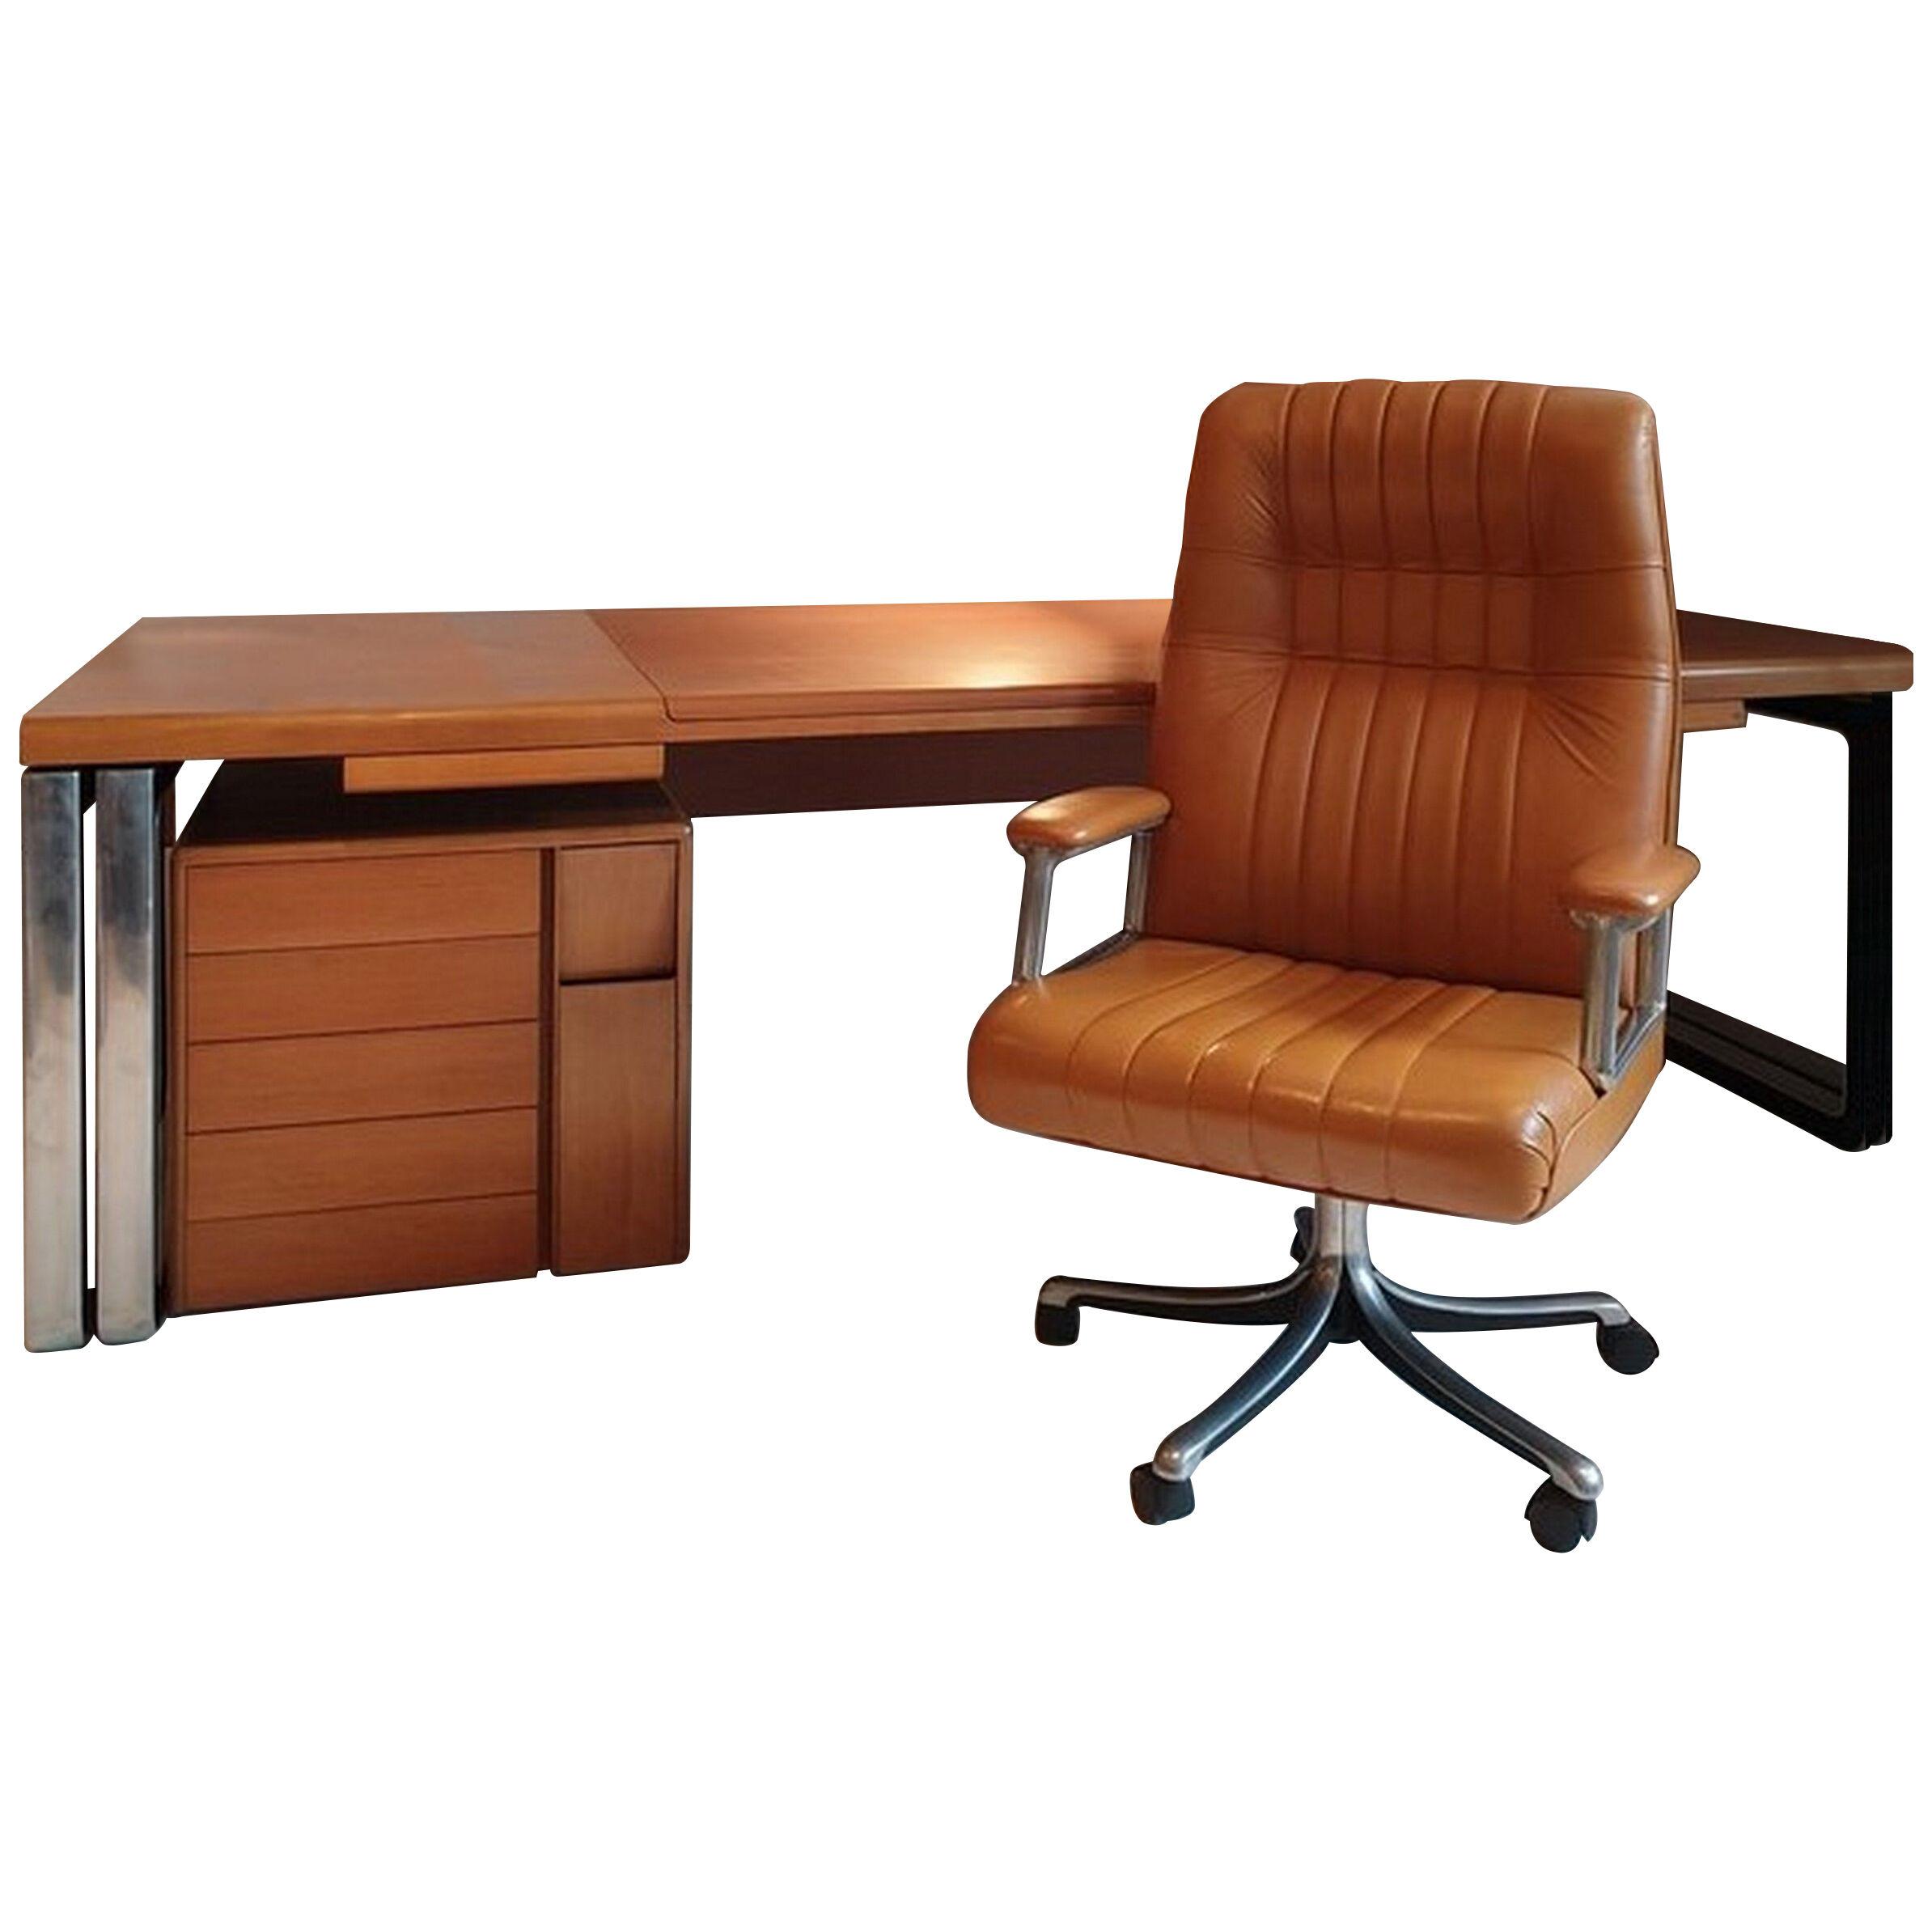 Mid Century Modern Desk and chair by Tecno, Milano